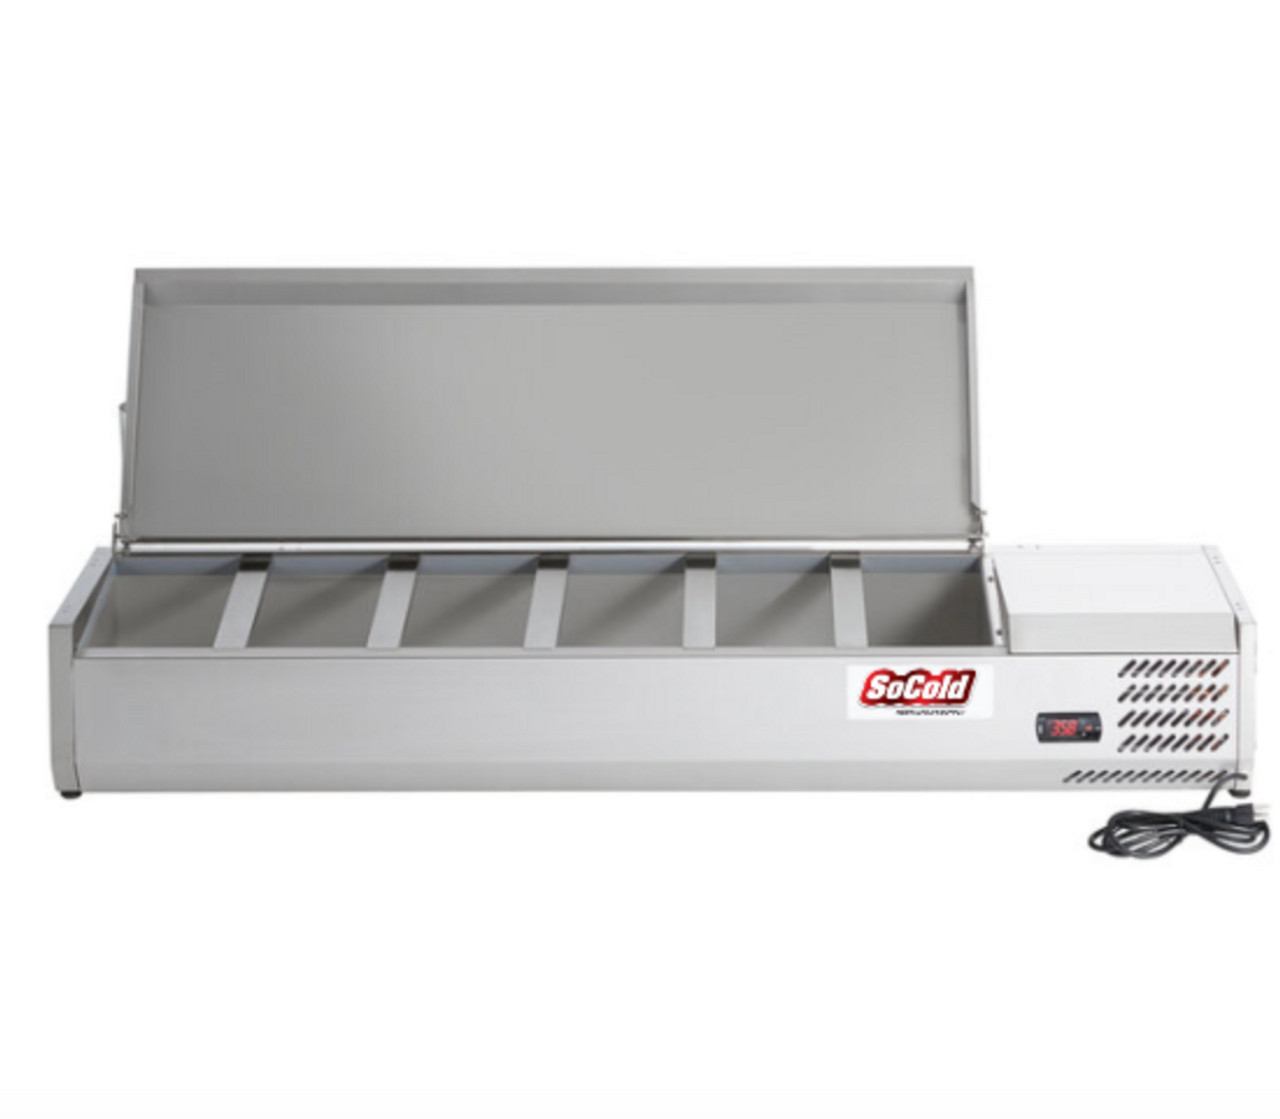 BUY | SHOP | OMCAN REFRIGERATED TOPPING RAILS WITH STAINLESS STEEL COVER. Standard Features: Digital LED temperature display; Stainless steel cover; Suitable for buffet 46657